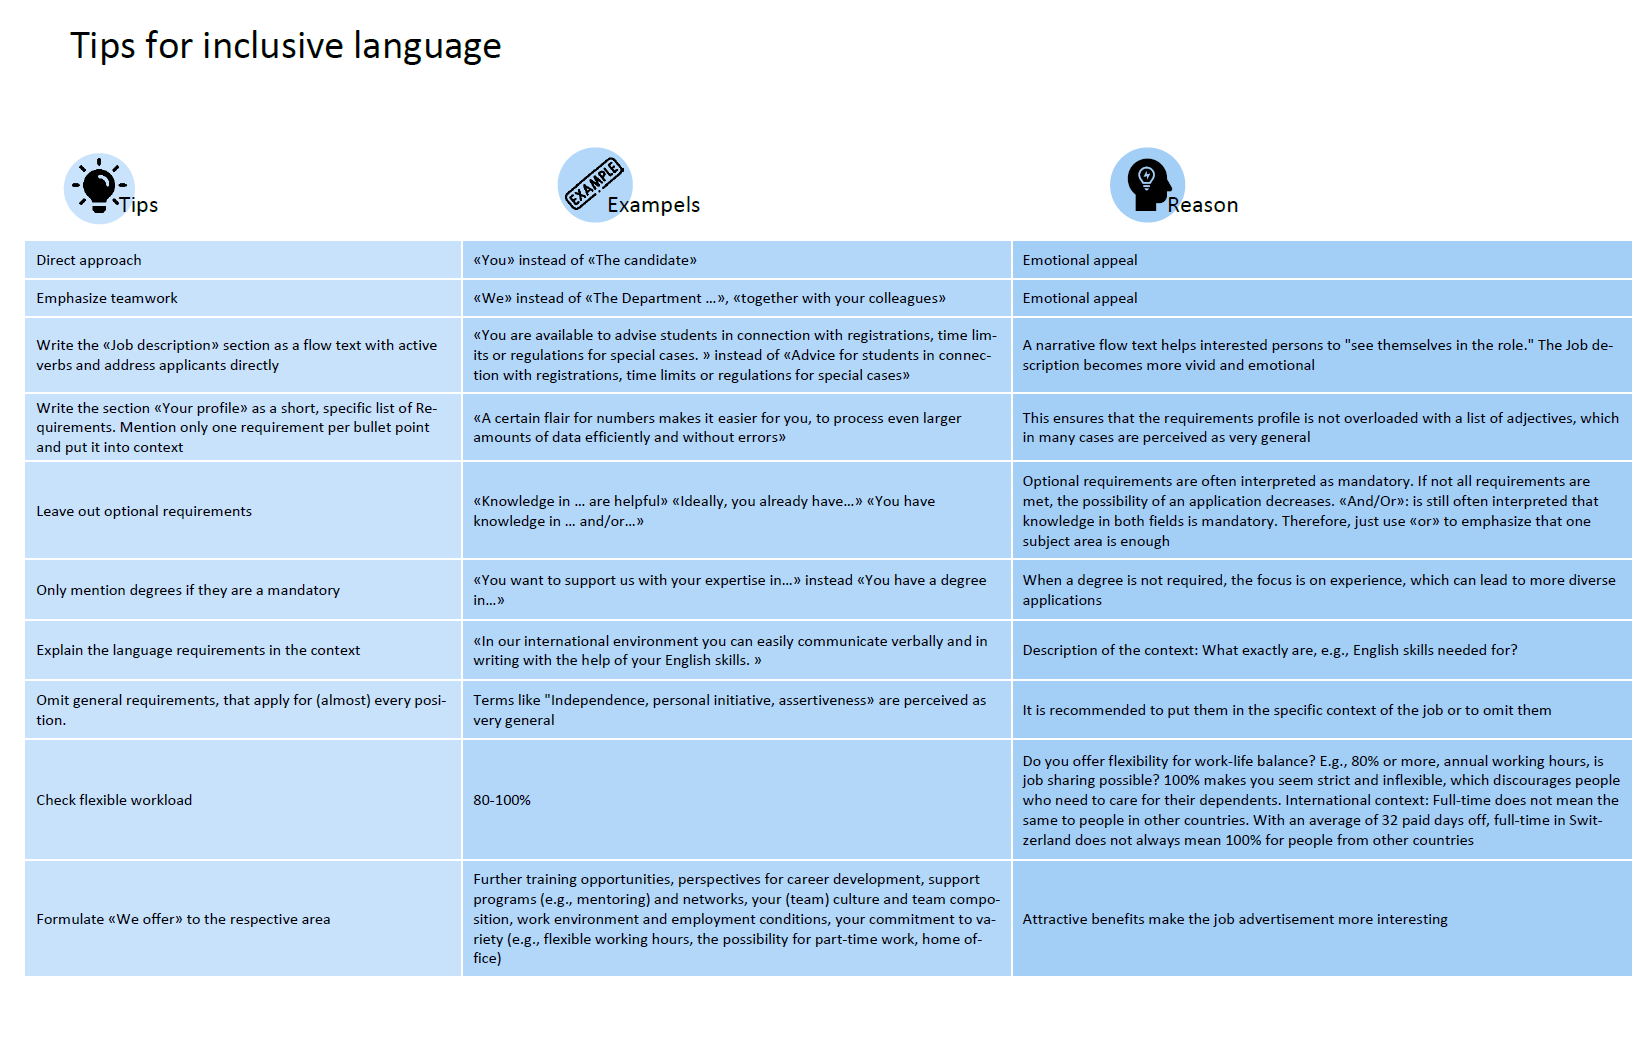 Tips for inclusive language